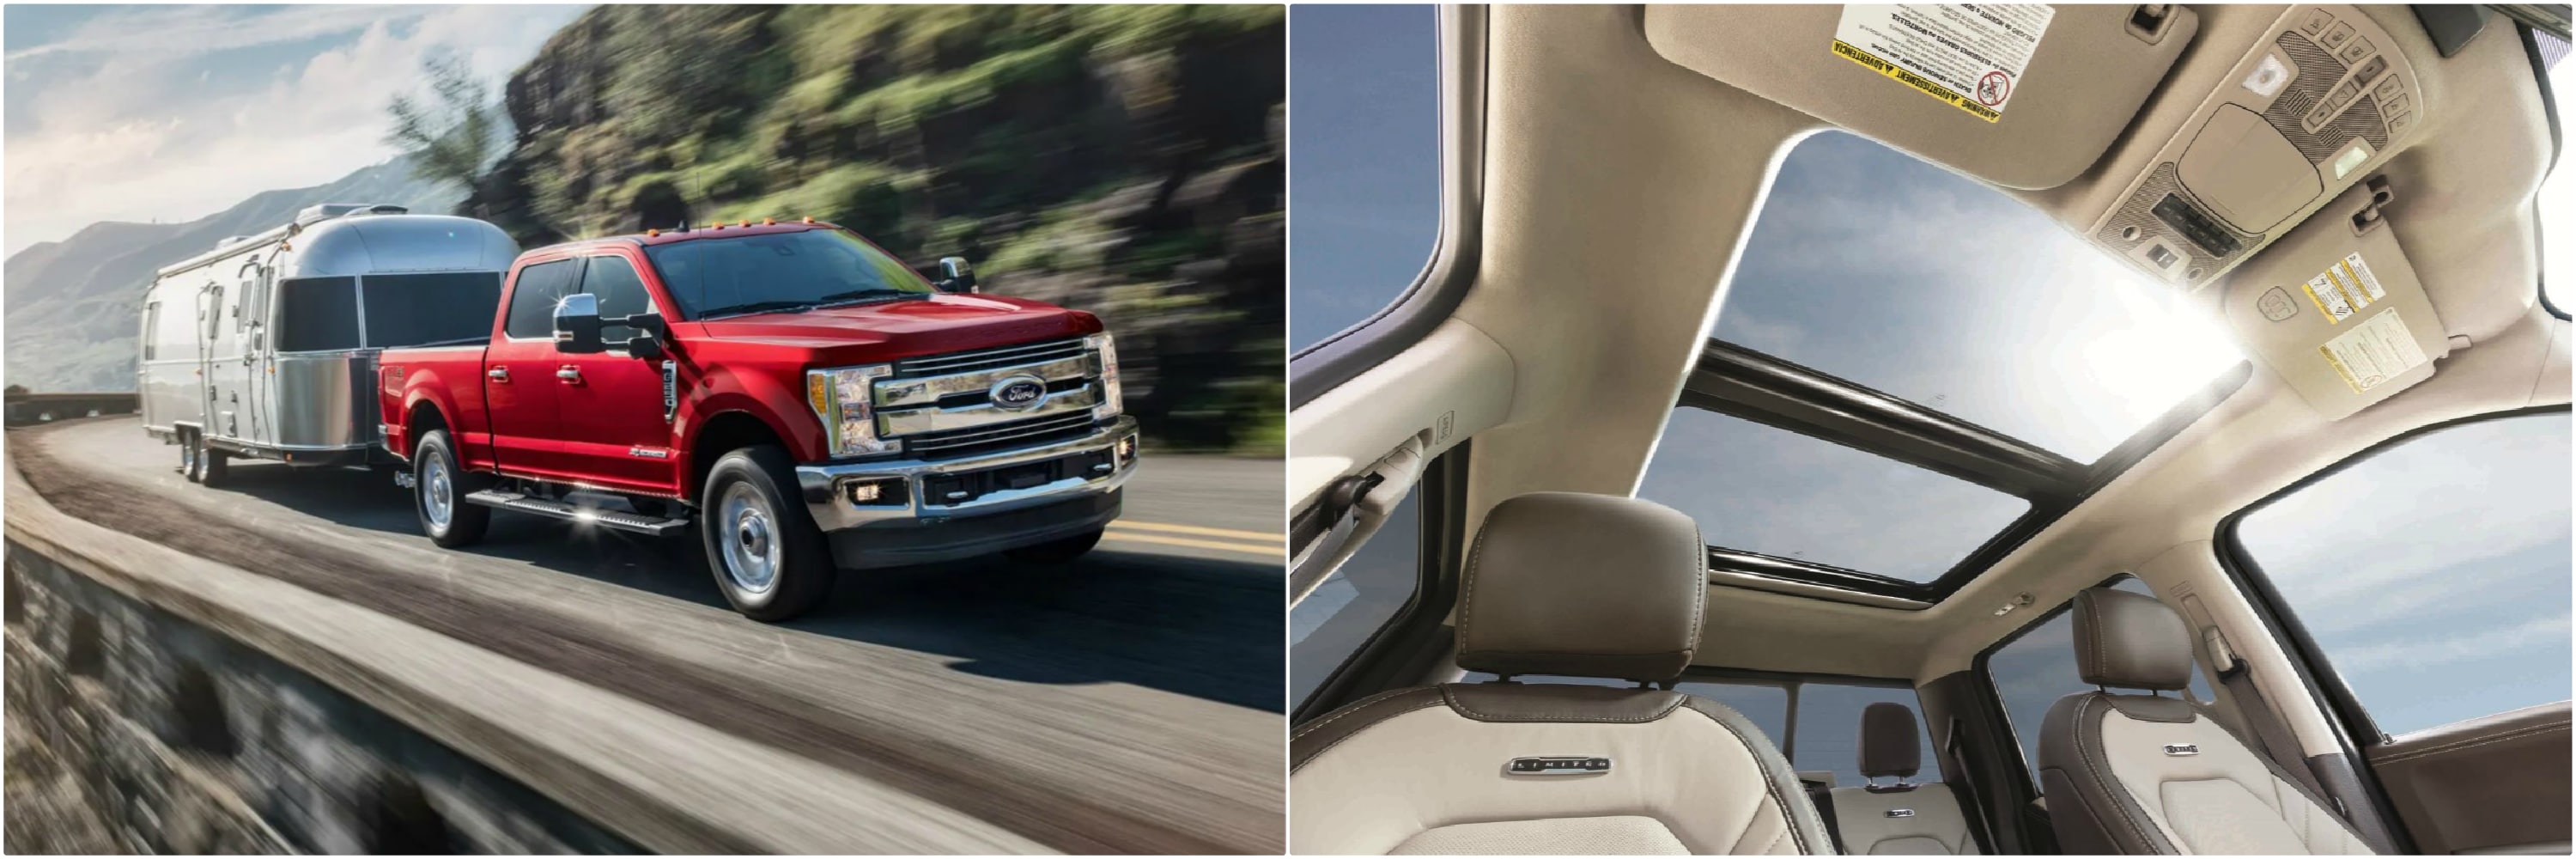 exterior view of a 2019 Ford Super Duty alongside an interior view of the sunroof of a 2018 model